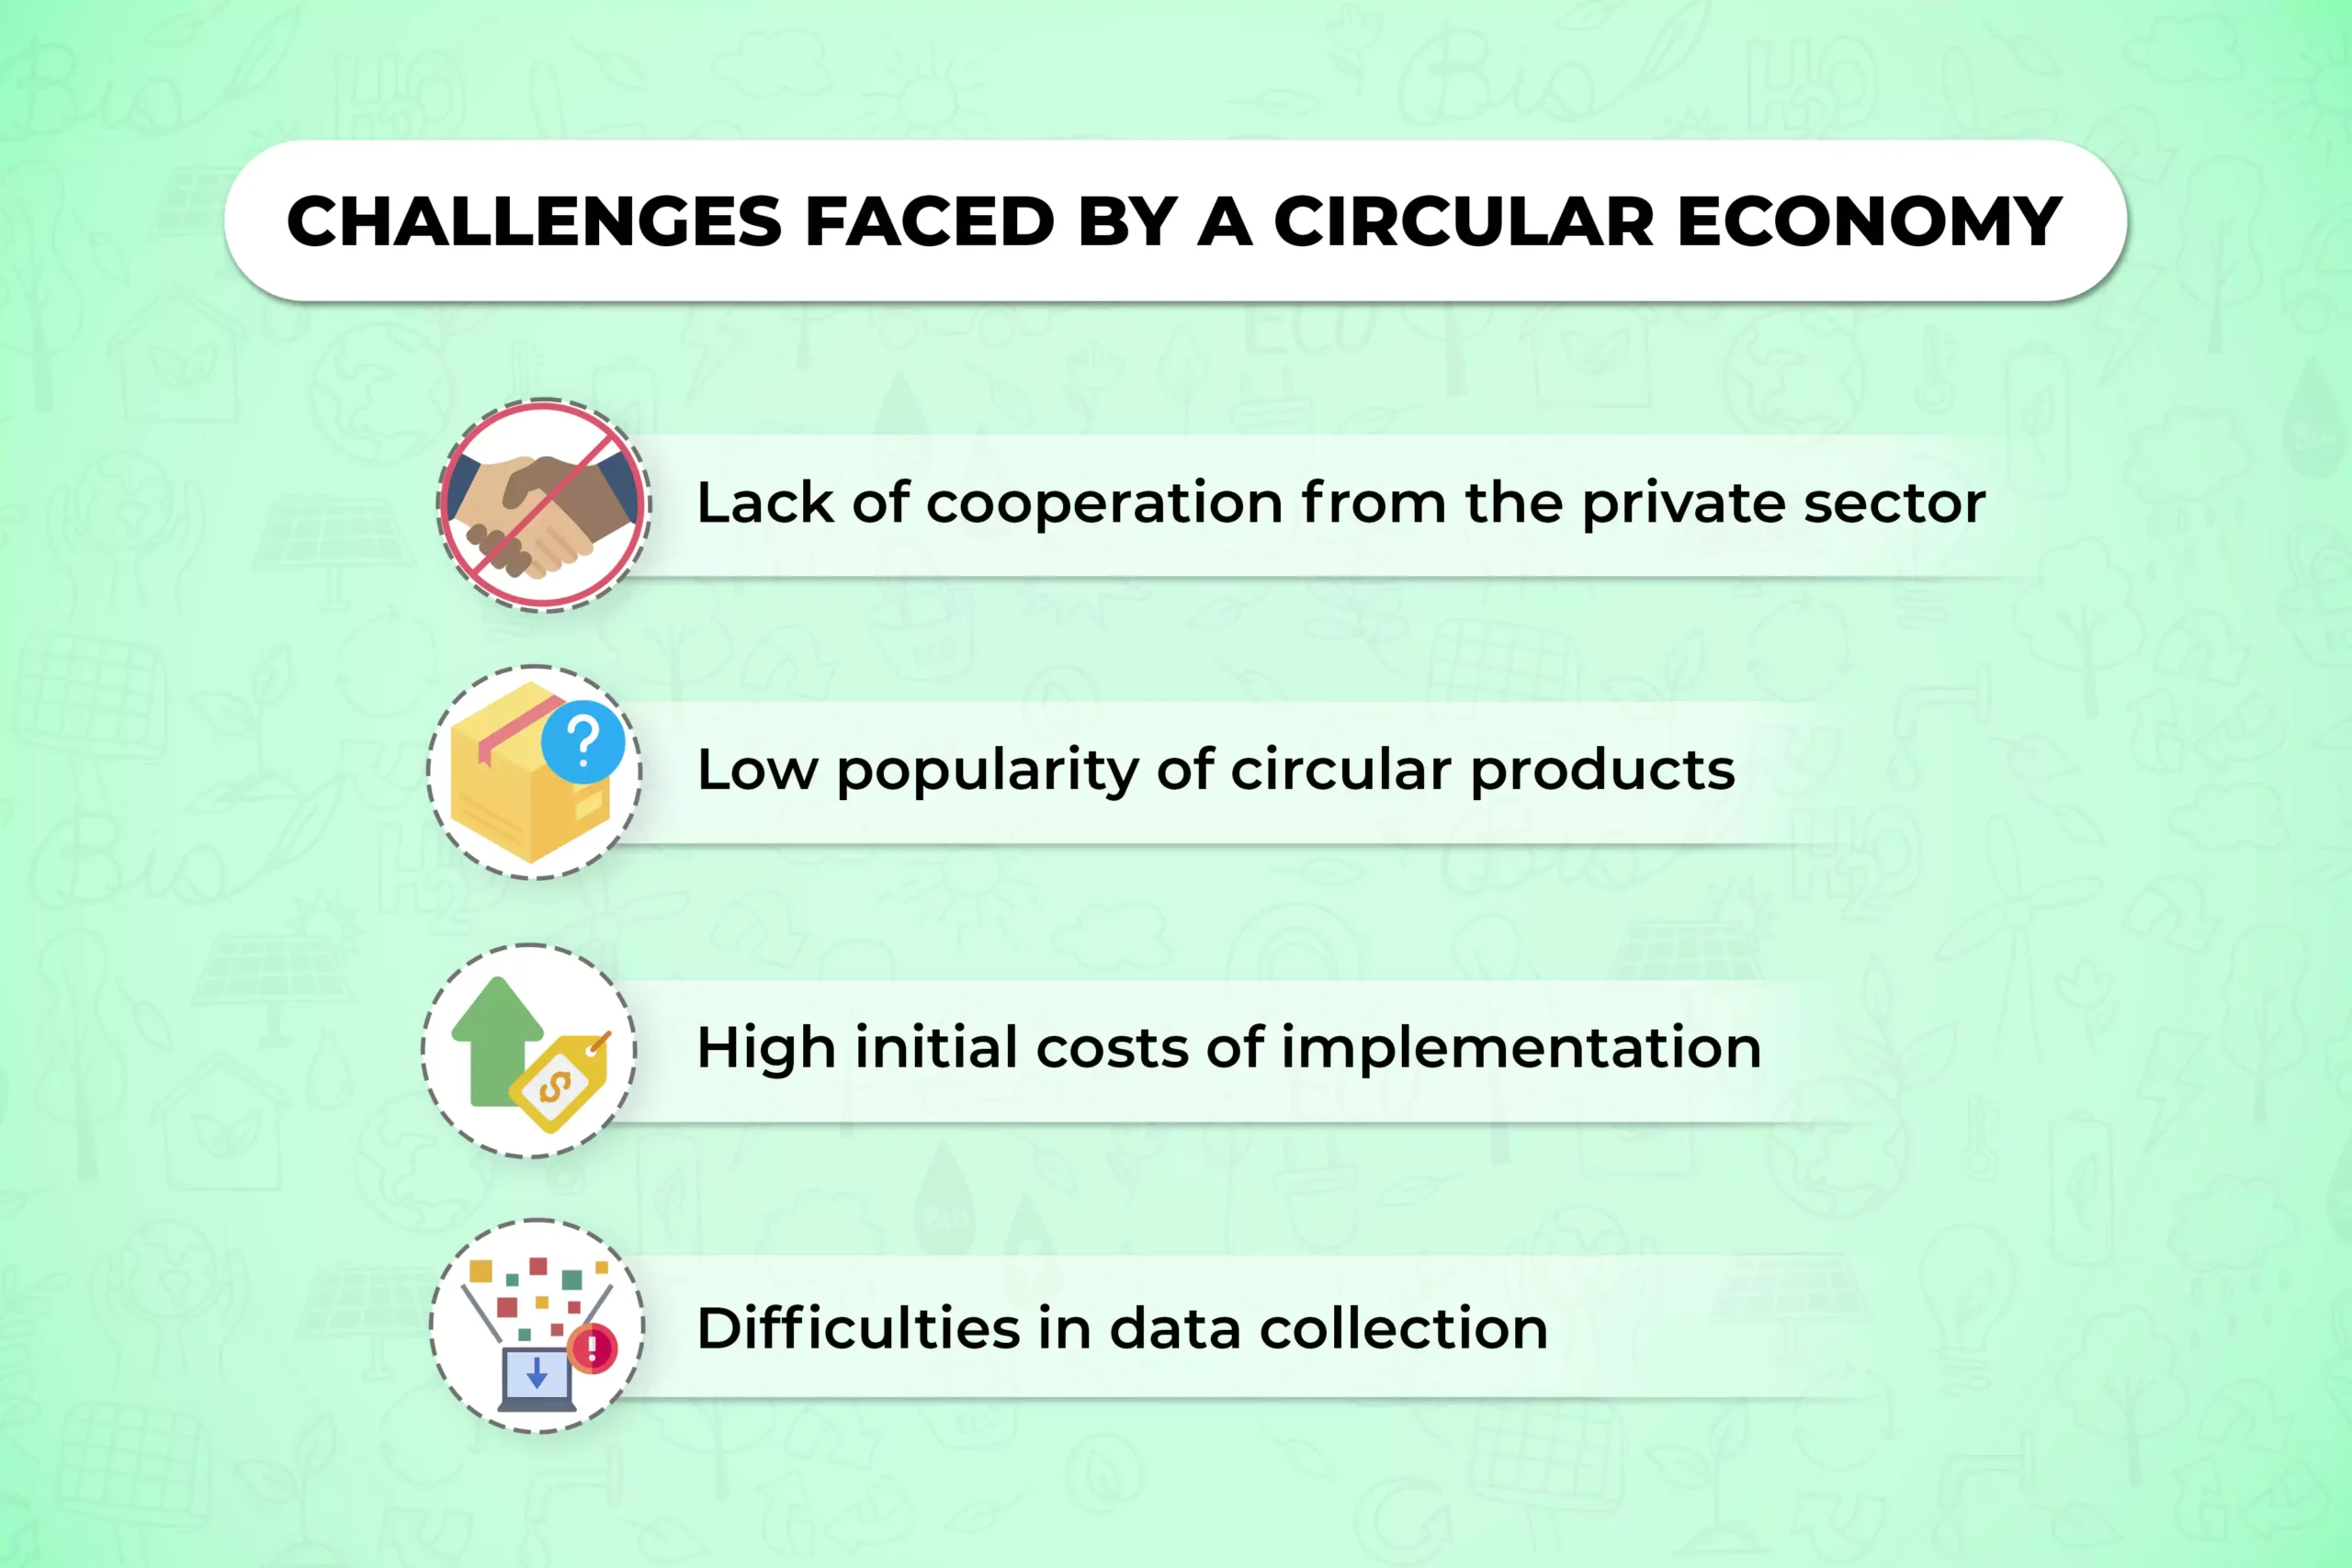 Challenges to a circular economy